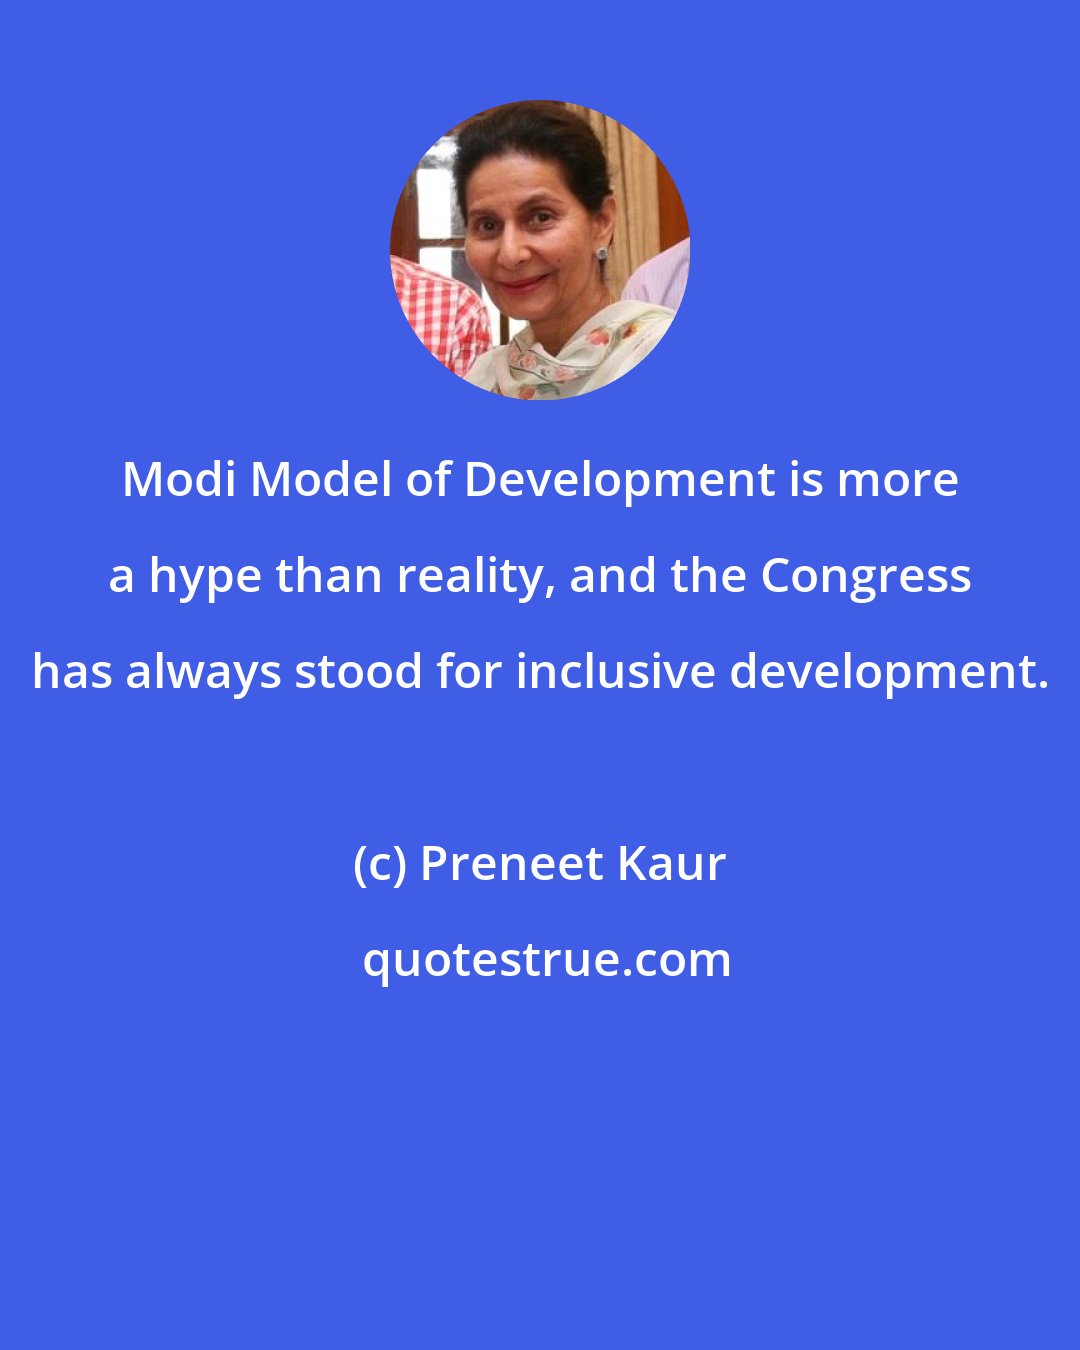 Preneet Kaur: Modi Model of Development is more a hype than reality, and the Congress has always stood for inclusive development.